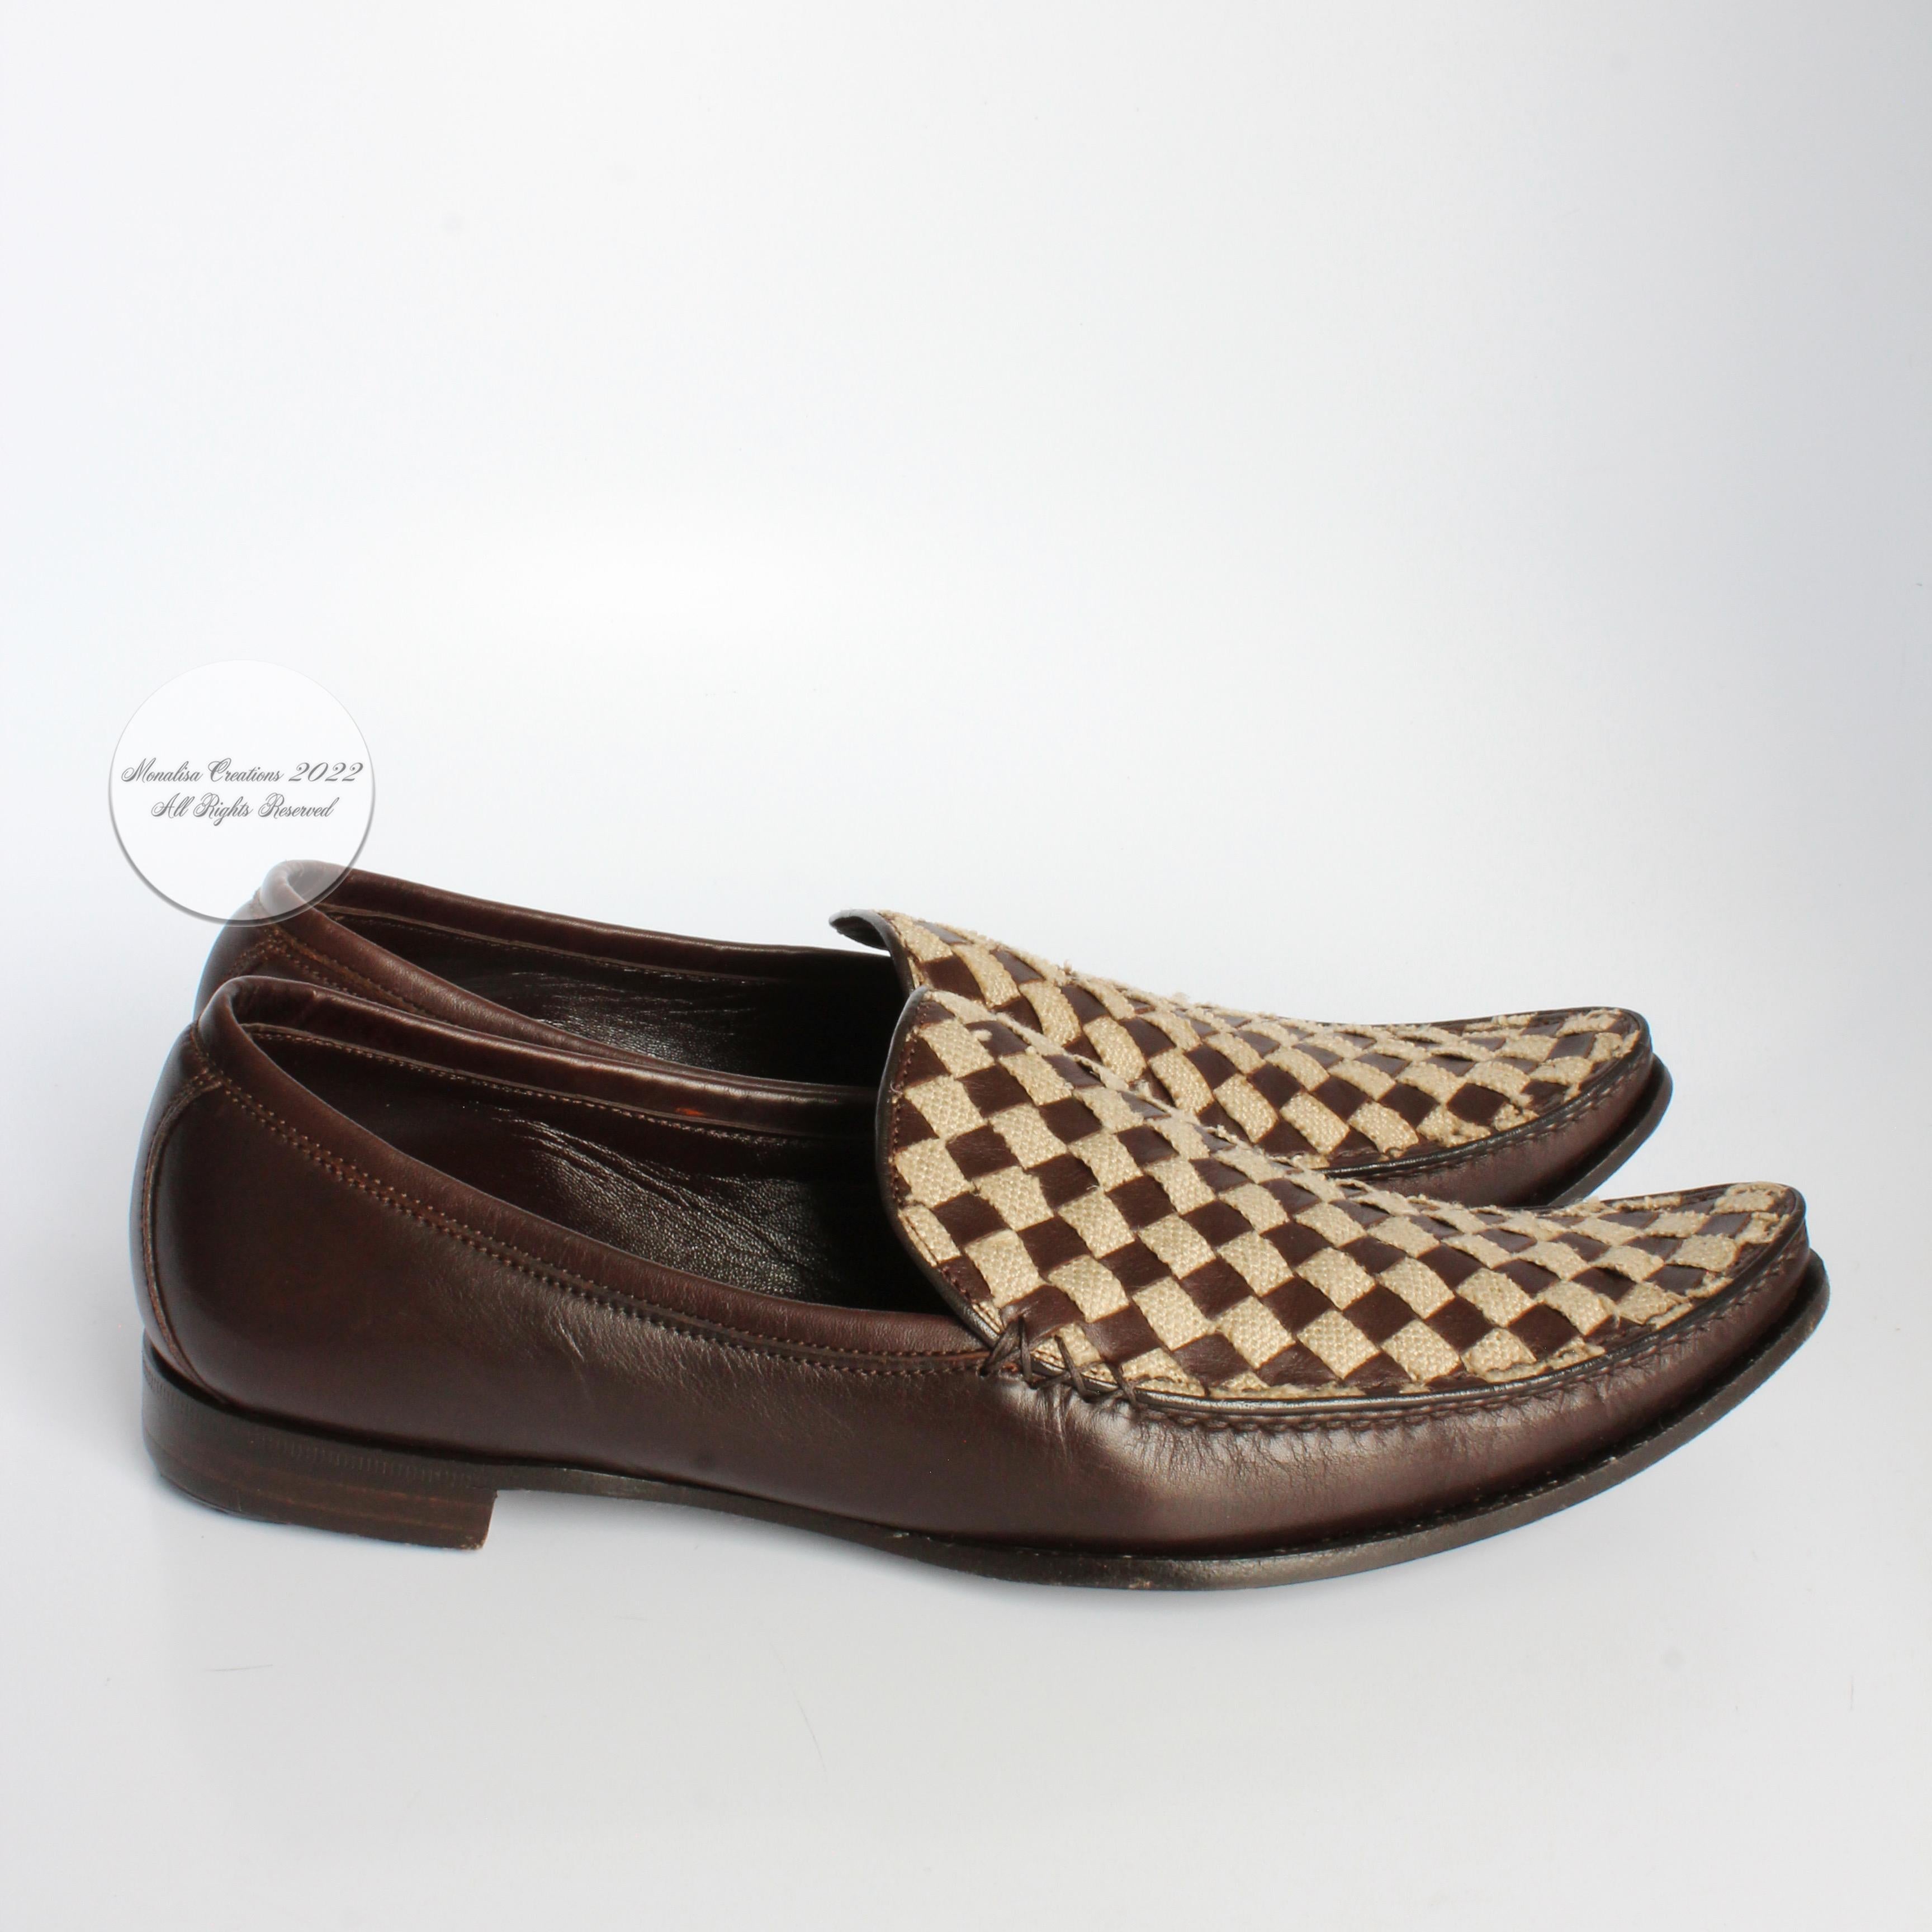 Black Bottega Veneta Loafers Brown Woven Leather and Canvas Flats Size 38.5 